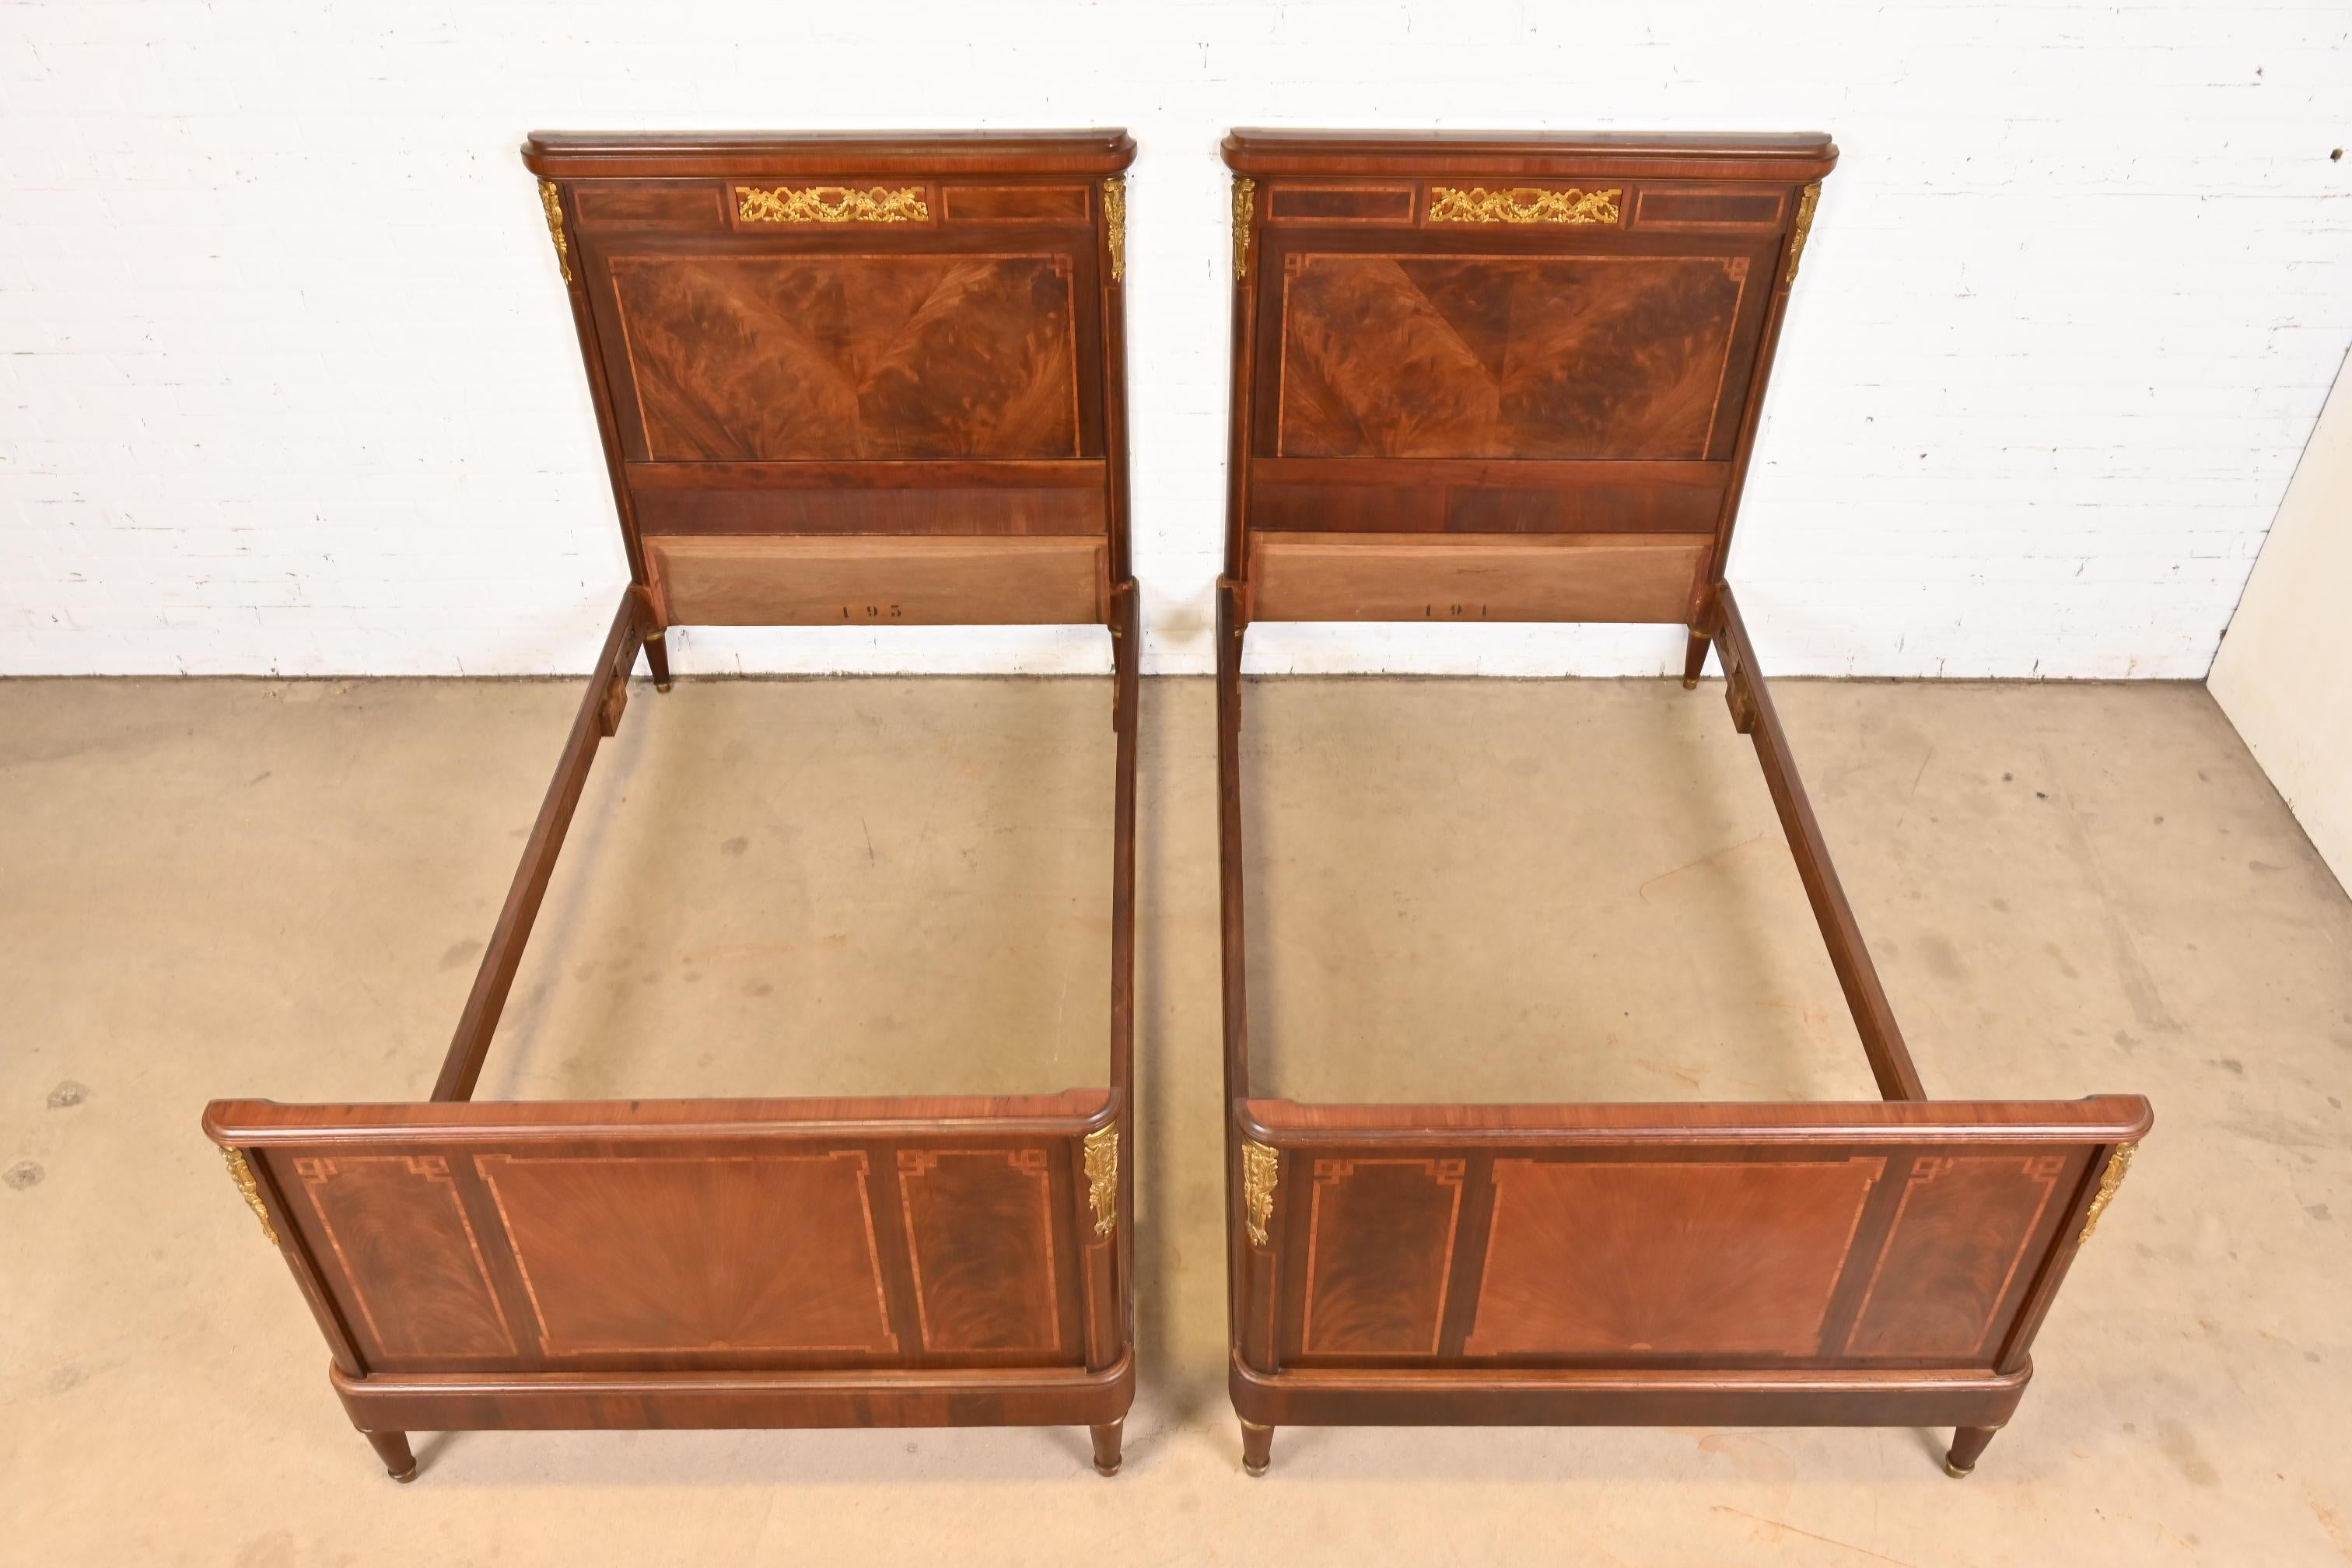 Antique French Regency Louis XVI Inlaid Flame Mahogany Bronze Mounted Twin Beds For Sale 4